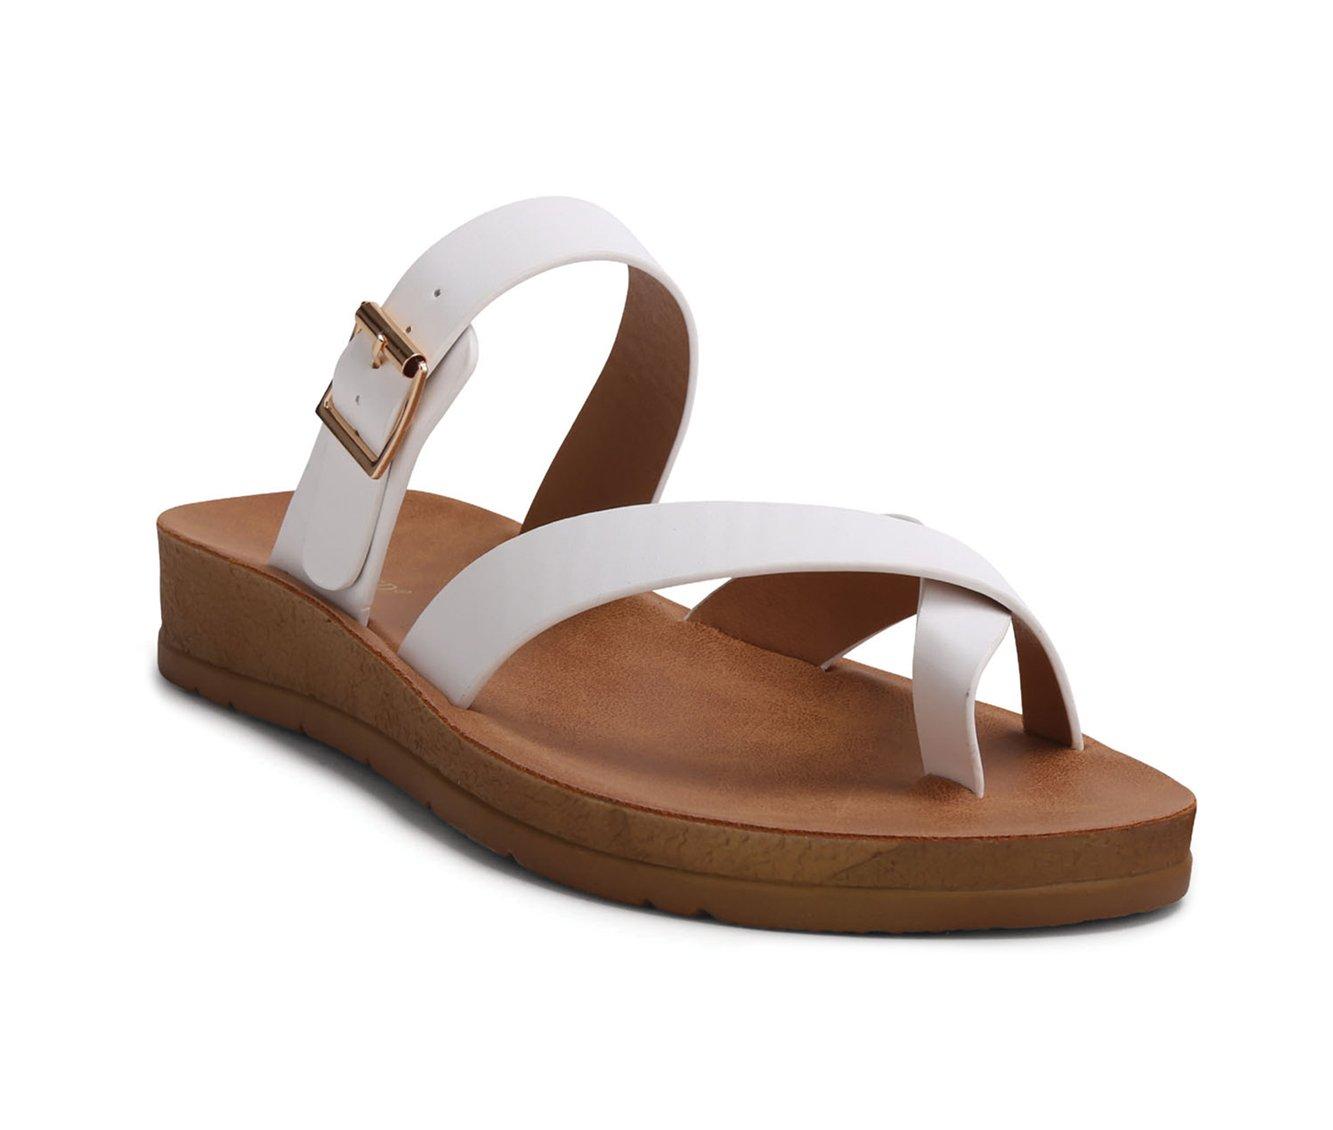 Women's Wanted Adrian Sandals